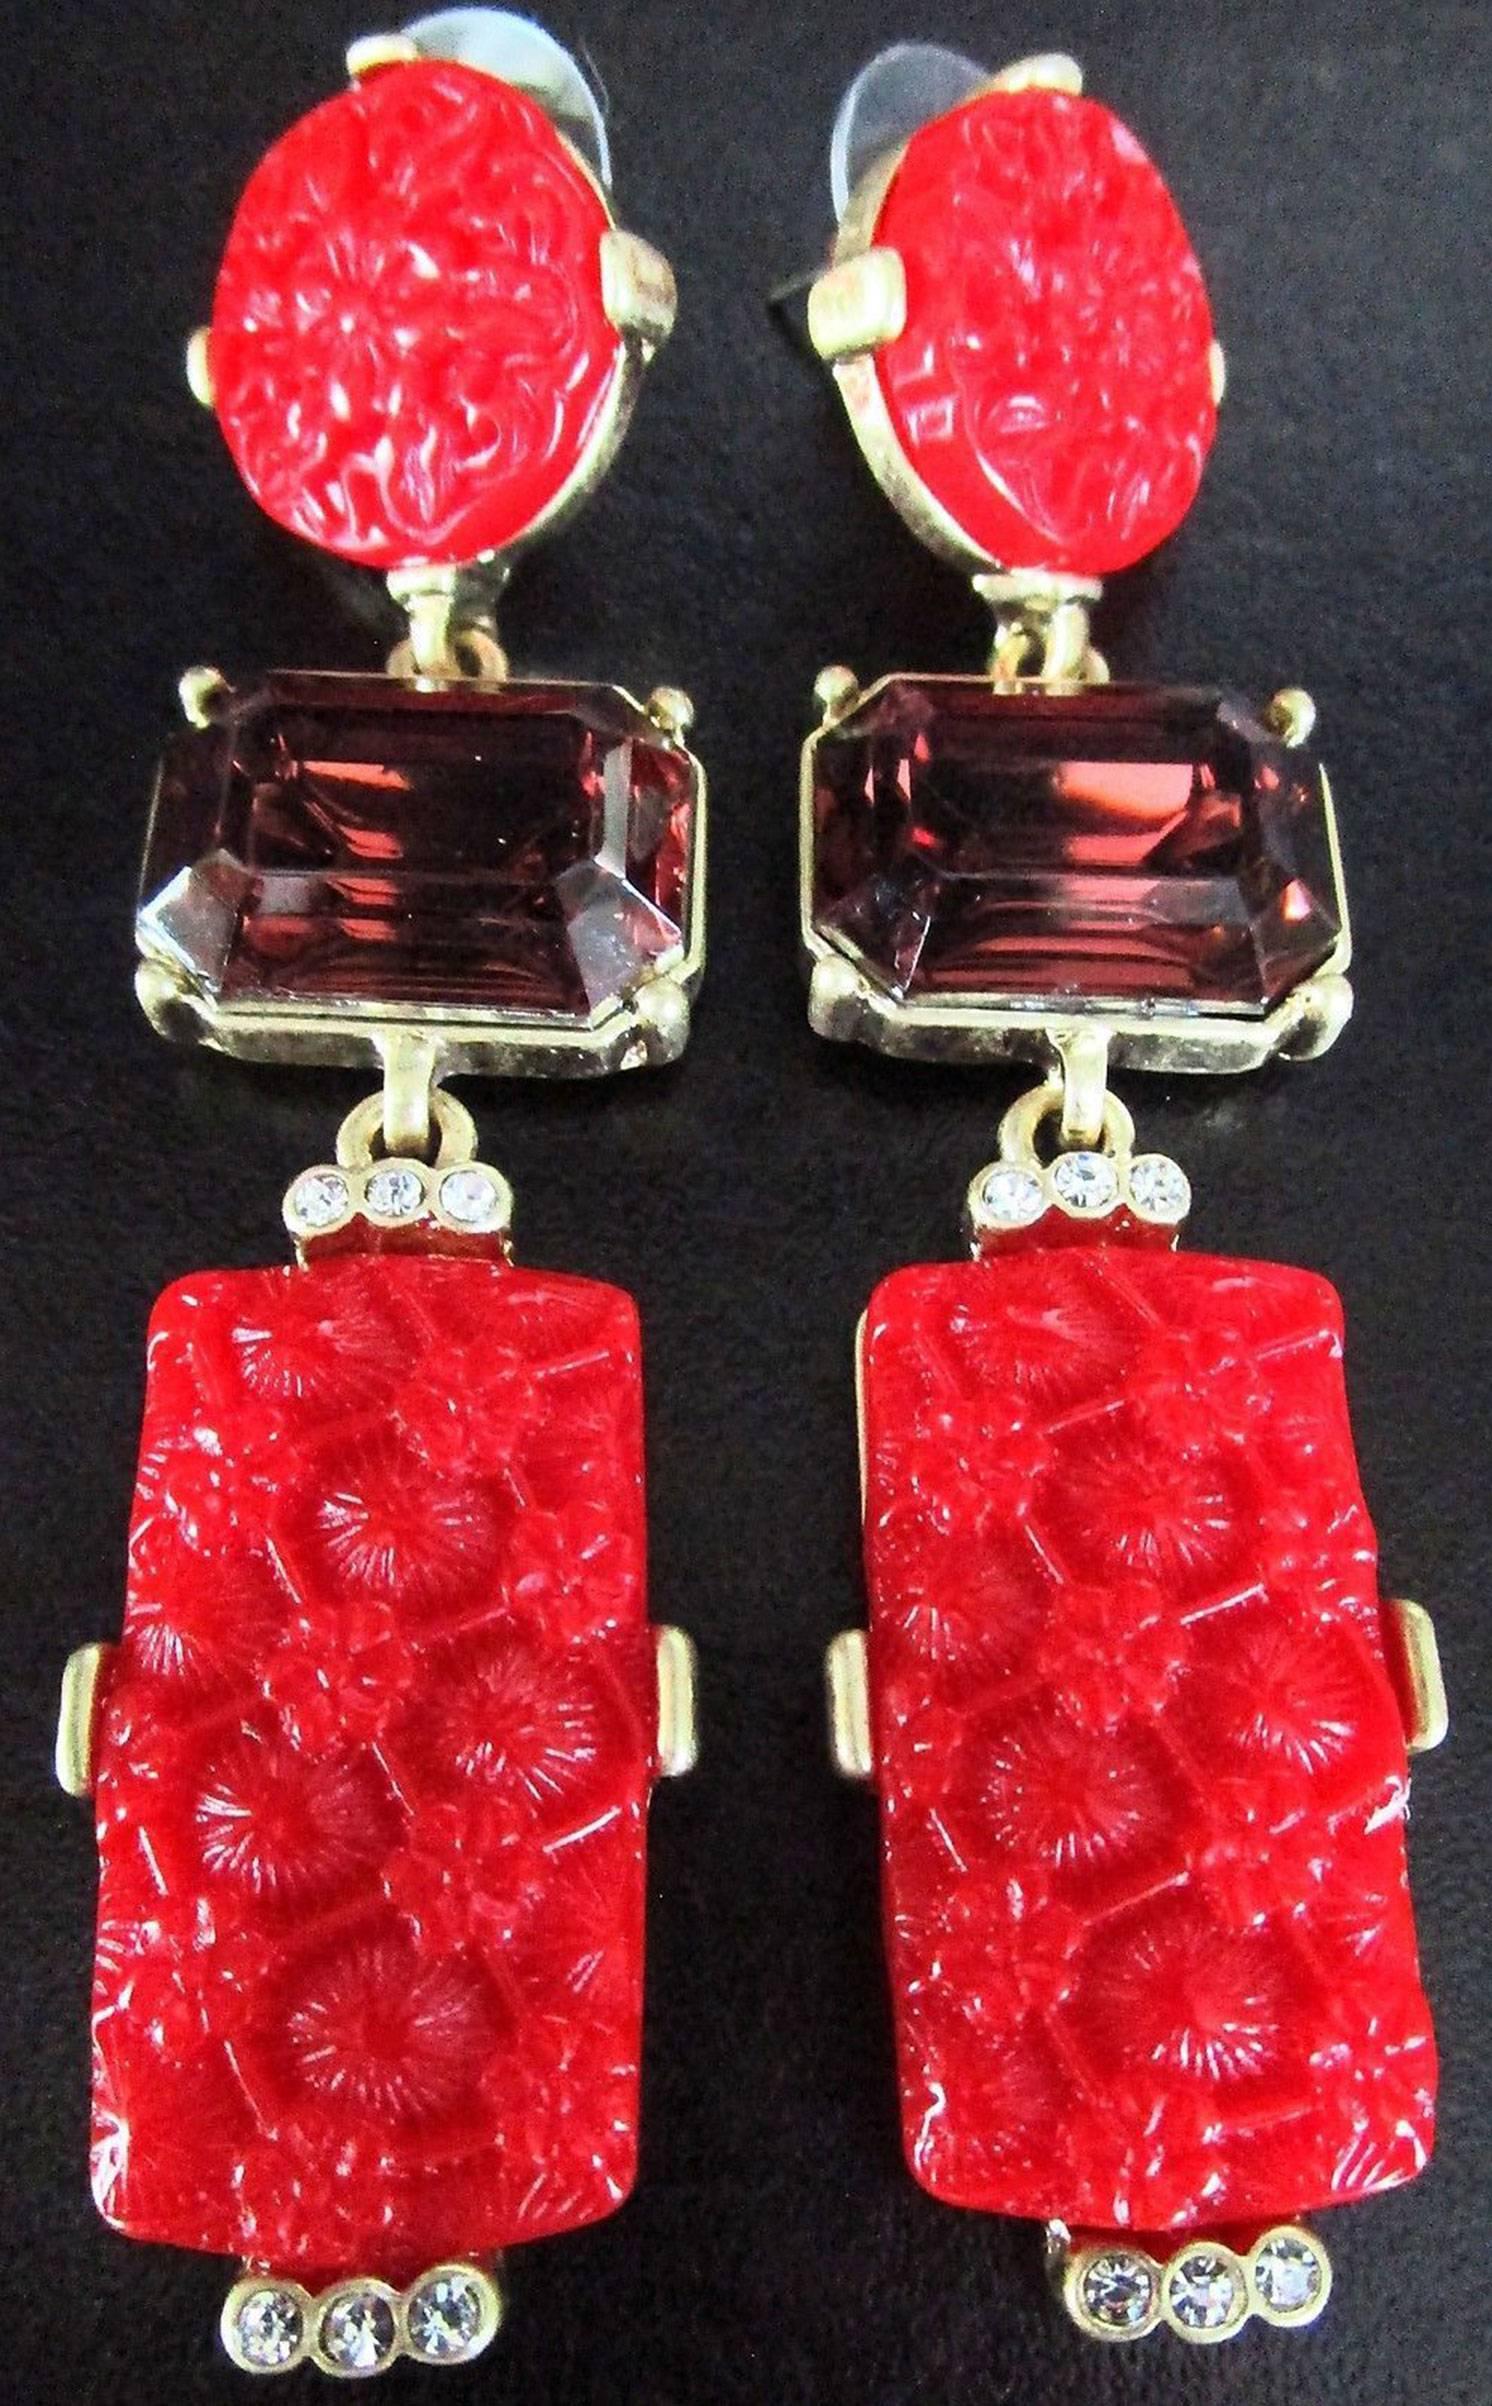 Beautiful Red Faux Coral Flower and Faux Gem Runway Earrings; Red molded Resin and Faux Emerald cut Gems; Gold Tone Metal and post for pierced ears. Striking Festive Show Stopper… Illuminating your Look with a touch of Class! 
